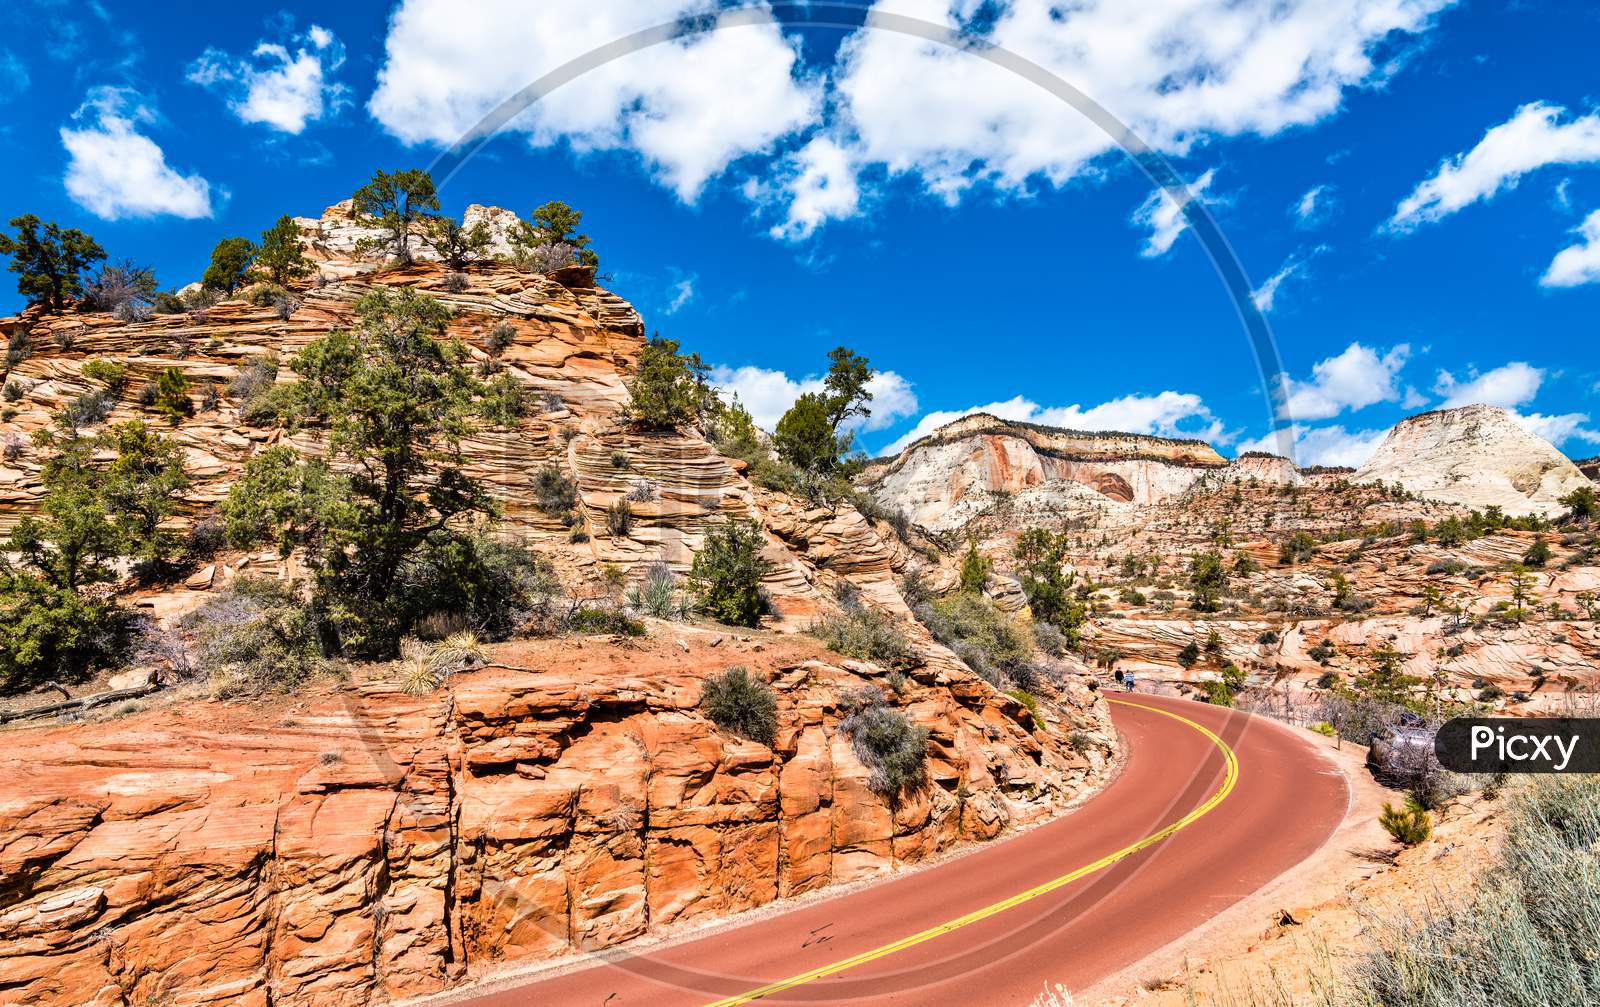 Zion-Mount Carmel Highway At Zion National Park